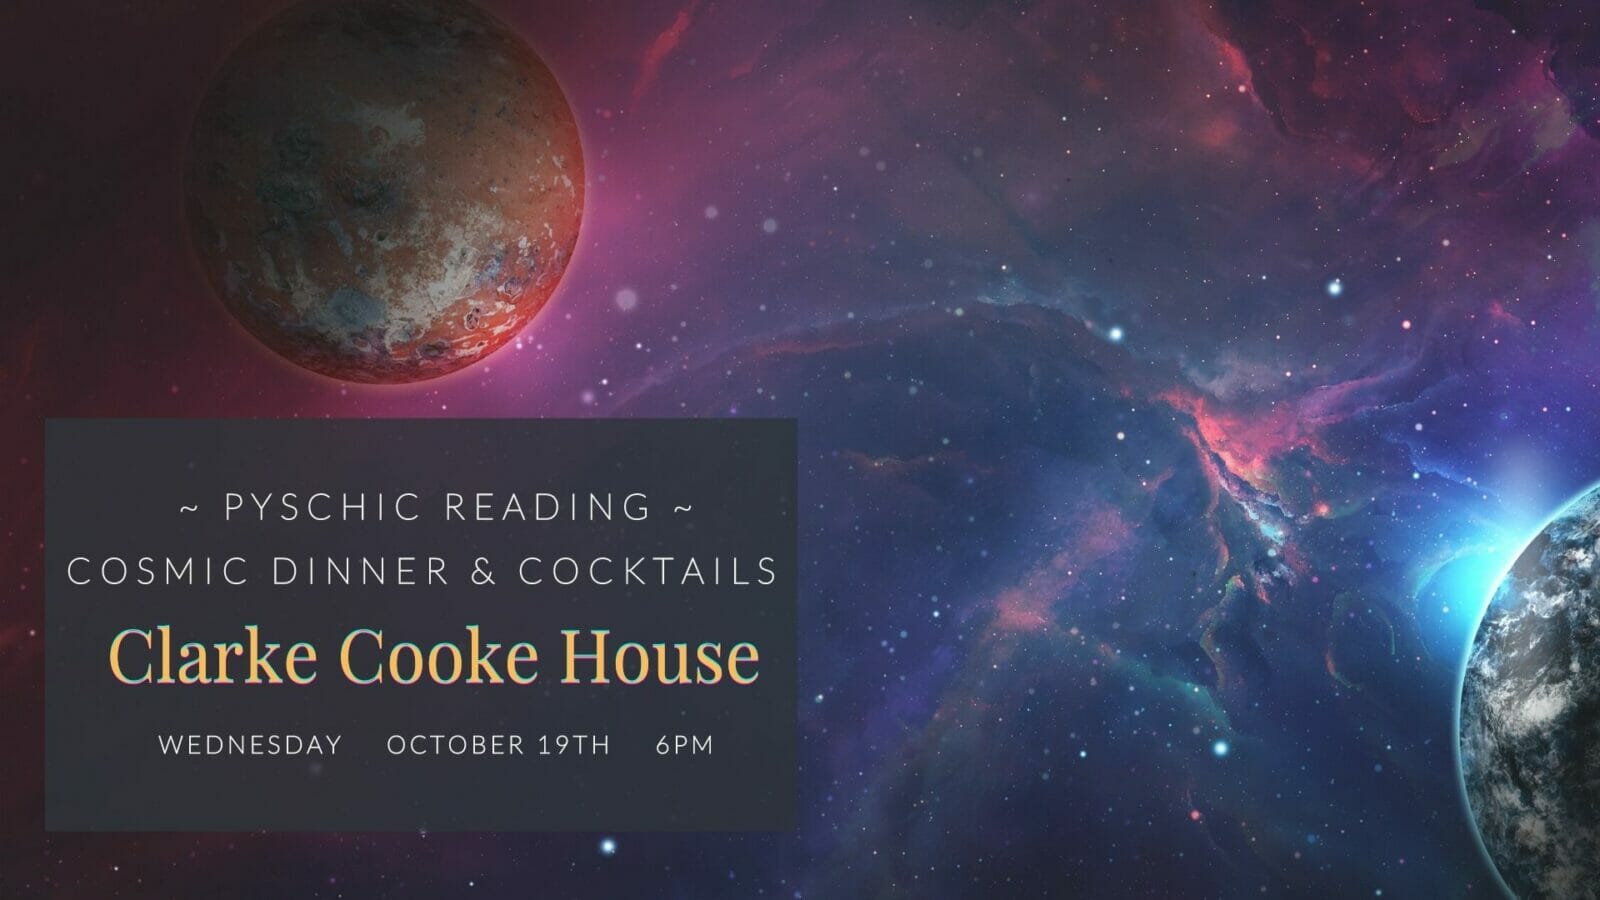 Cosmic Cocktails Dinner and Pyschic Reading